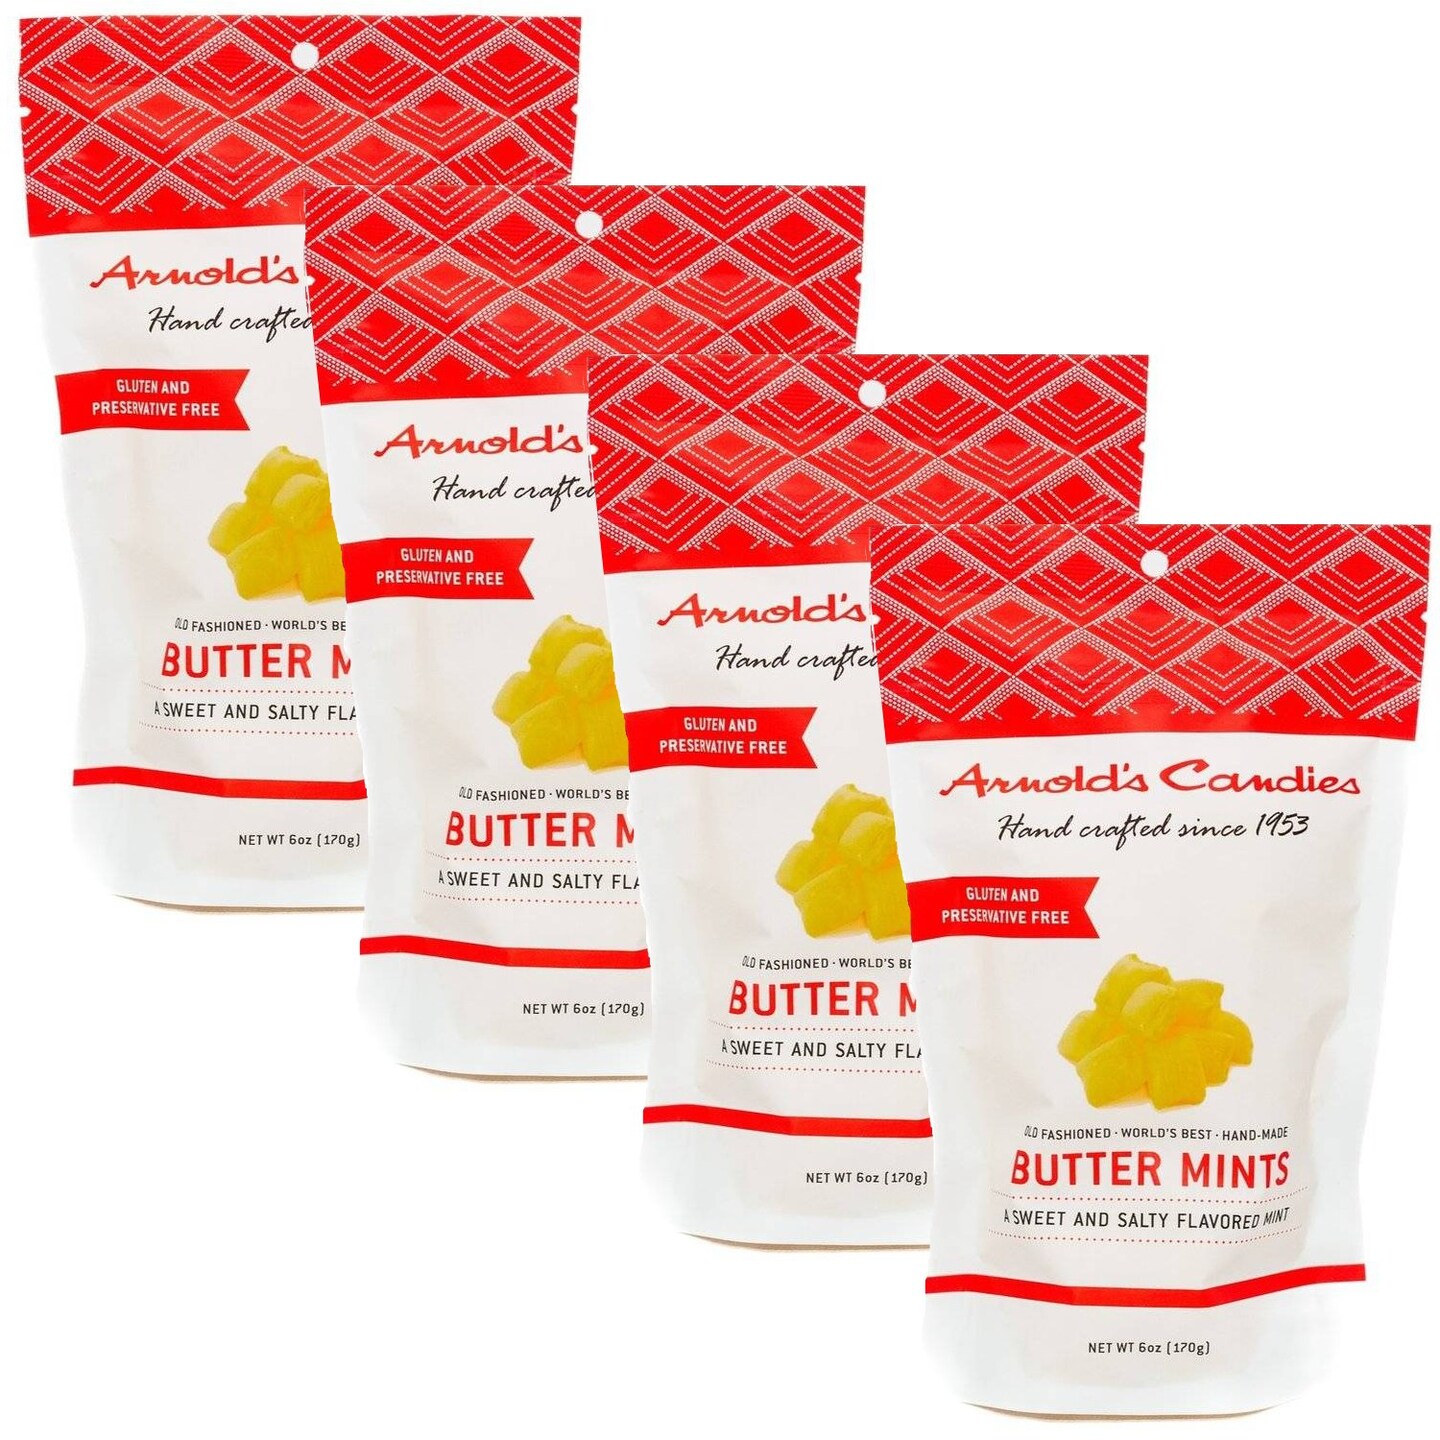 Arnold&#x27;s Old Fashioned Handmade Buttermints Sweet Buttery Flavor 4 bags